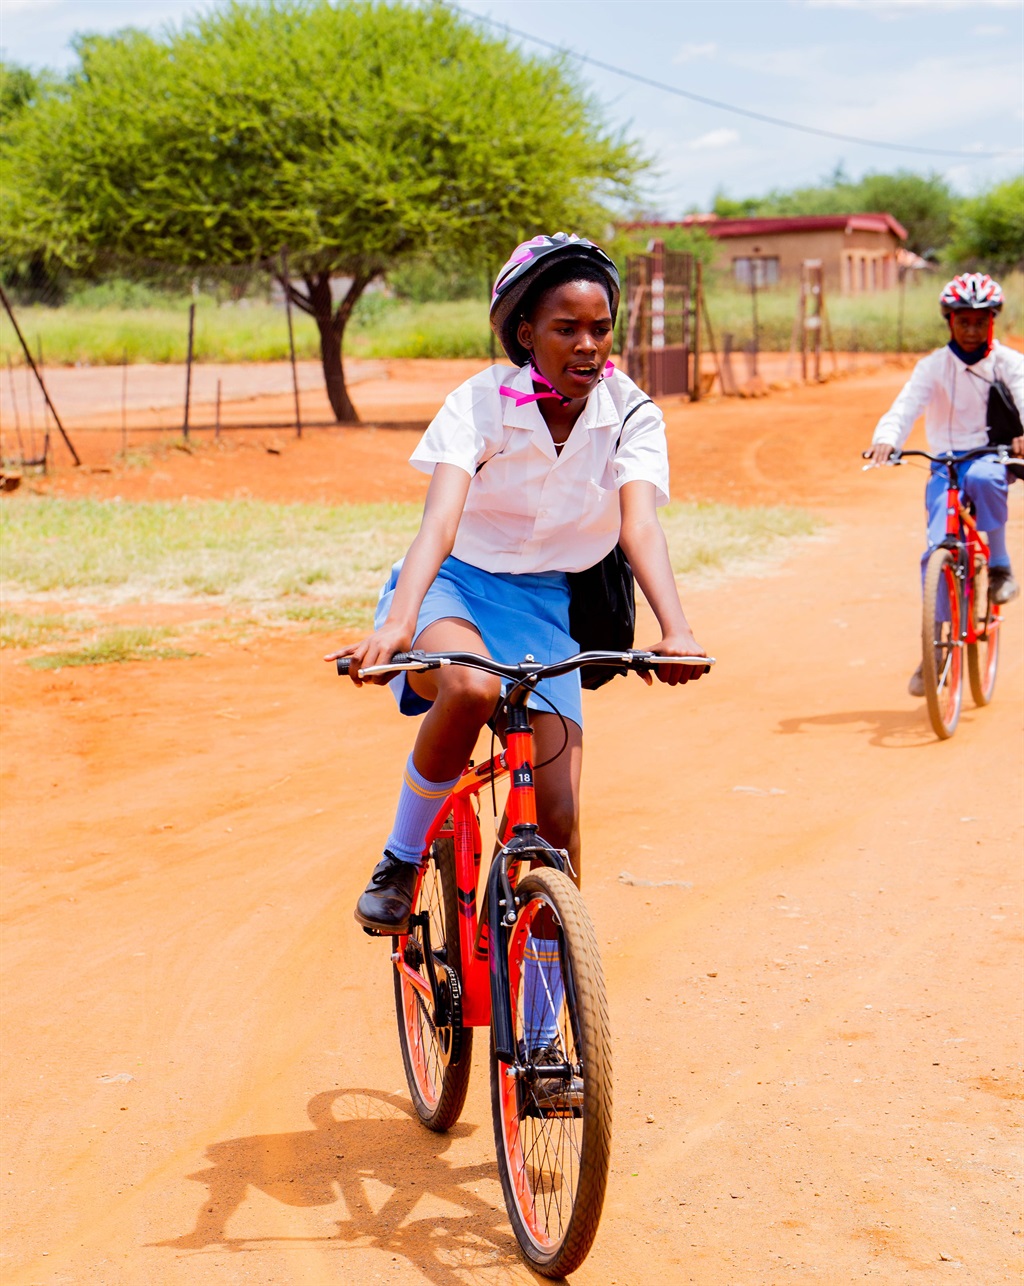 Medipost Holdings and Bikes4ERP have teamed up to donate 100 hard-wearing mountain bikes to help children get to school.